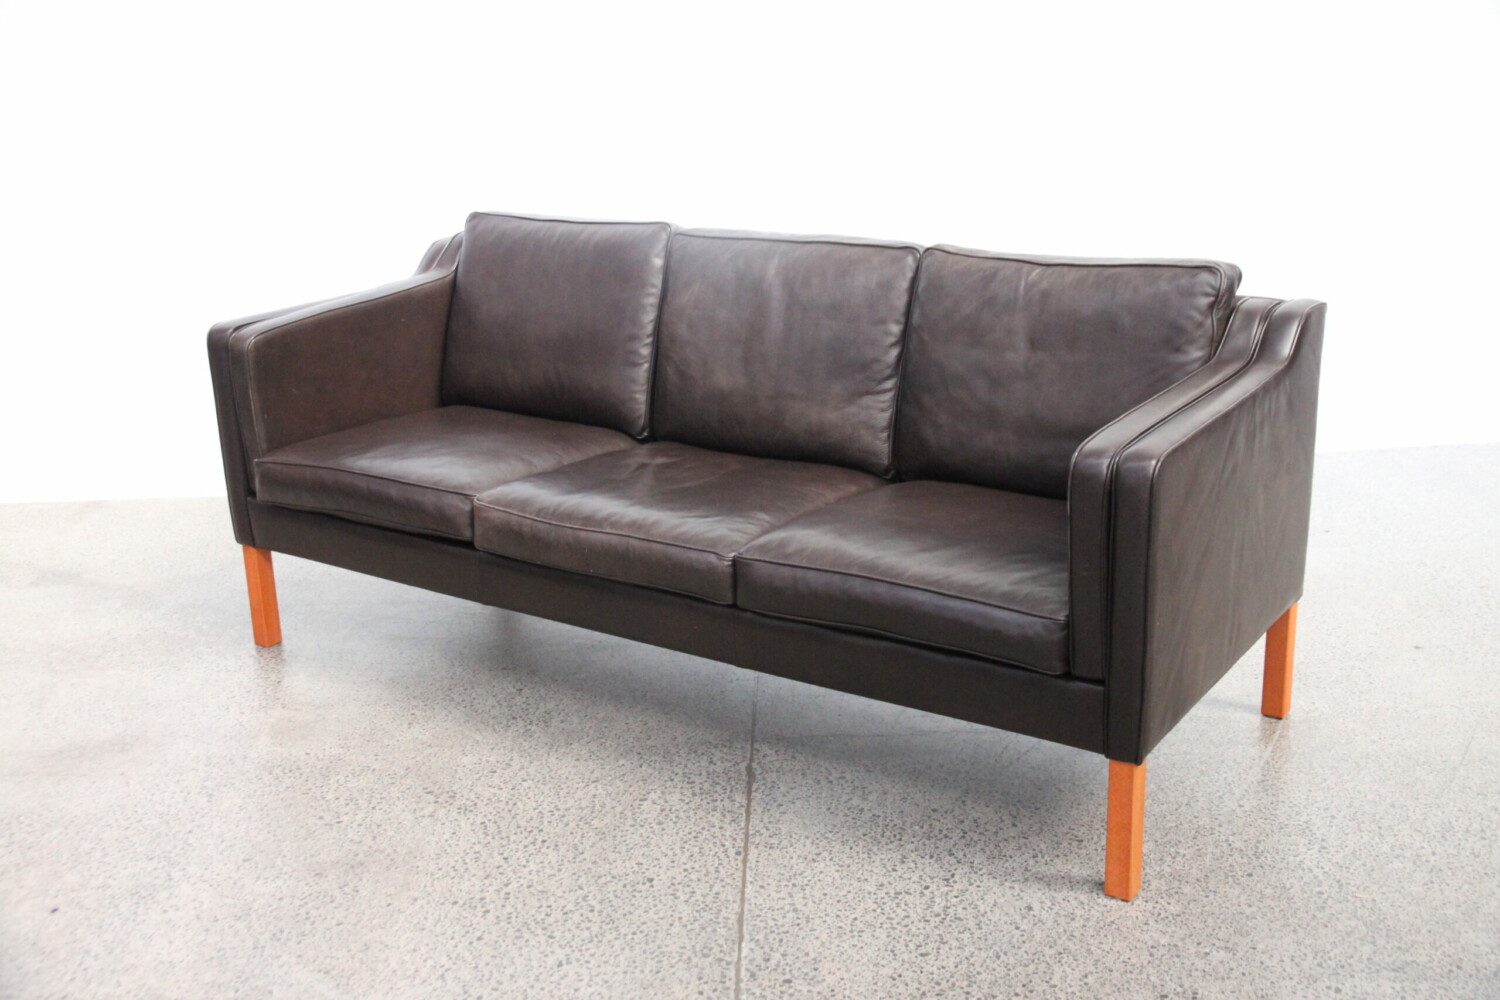 Pair of brown leather sofas